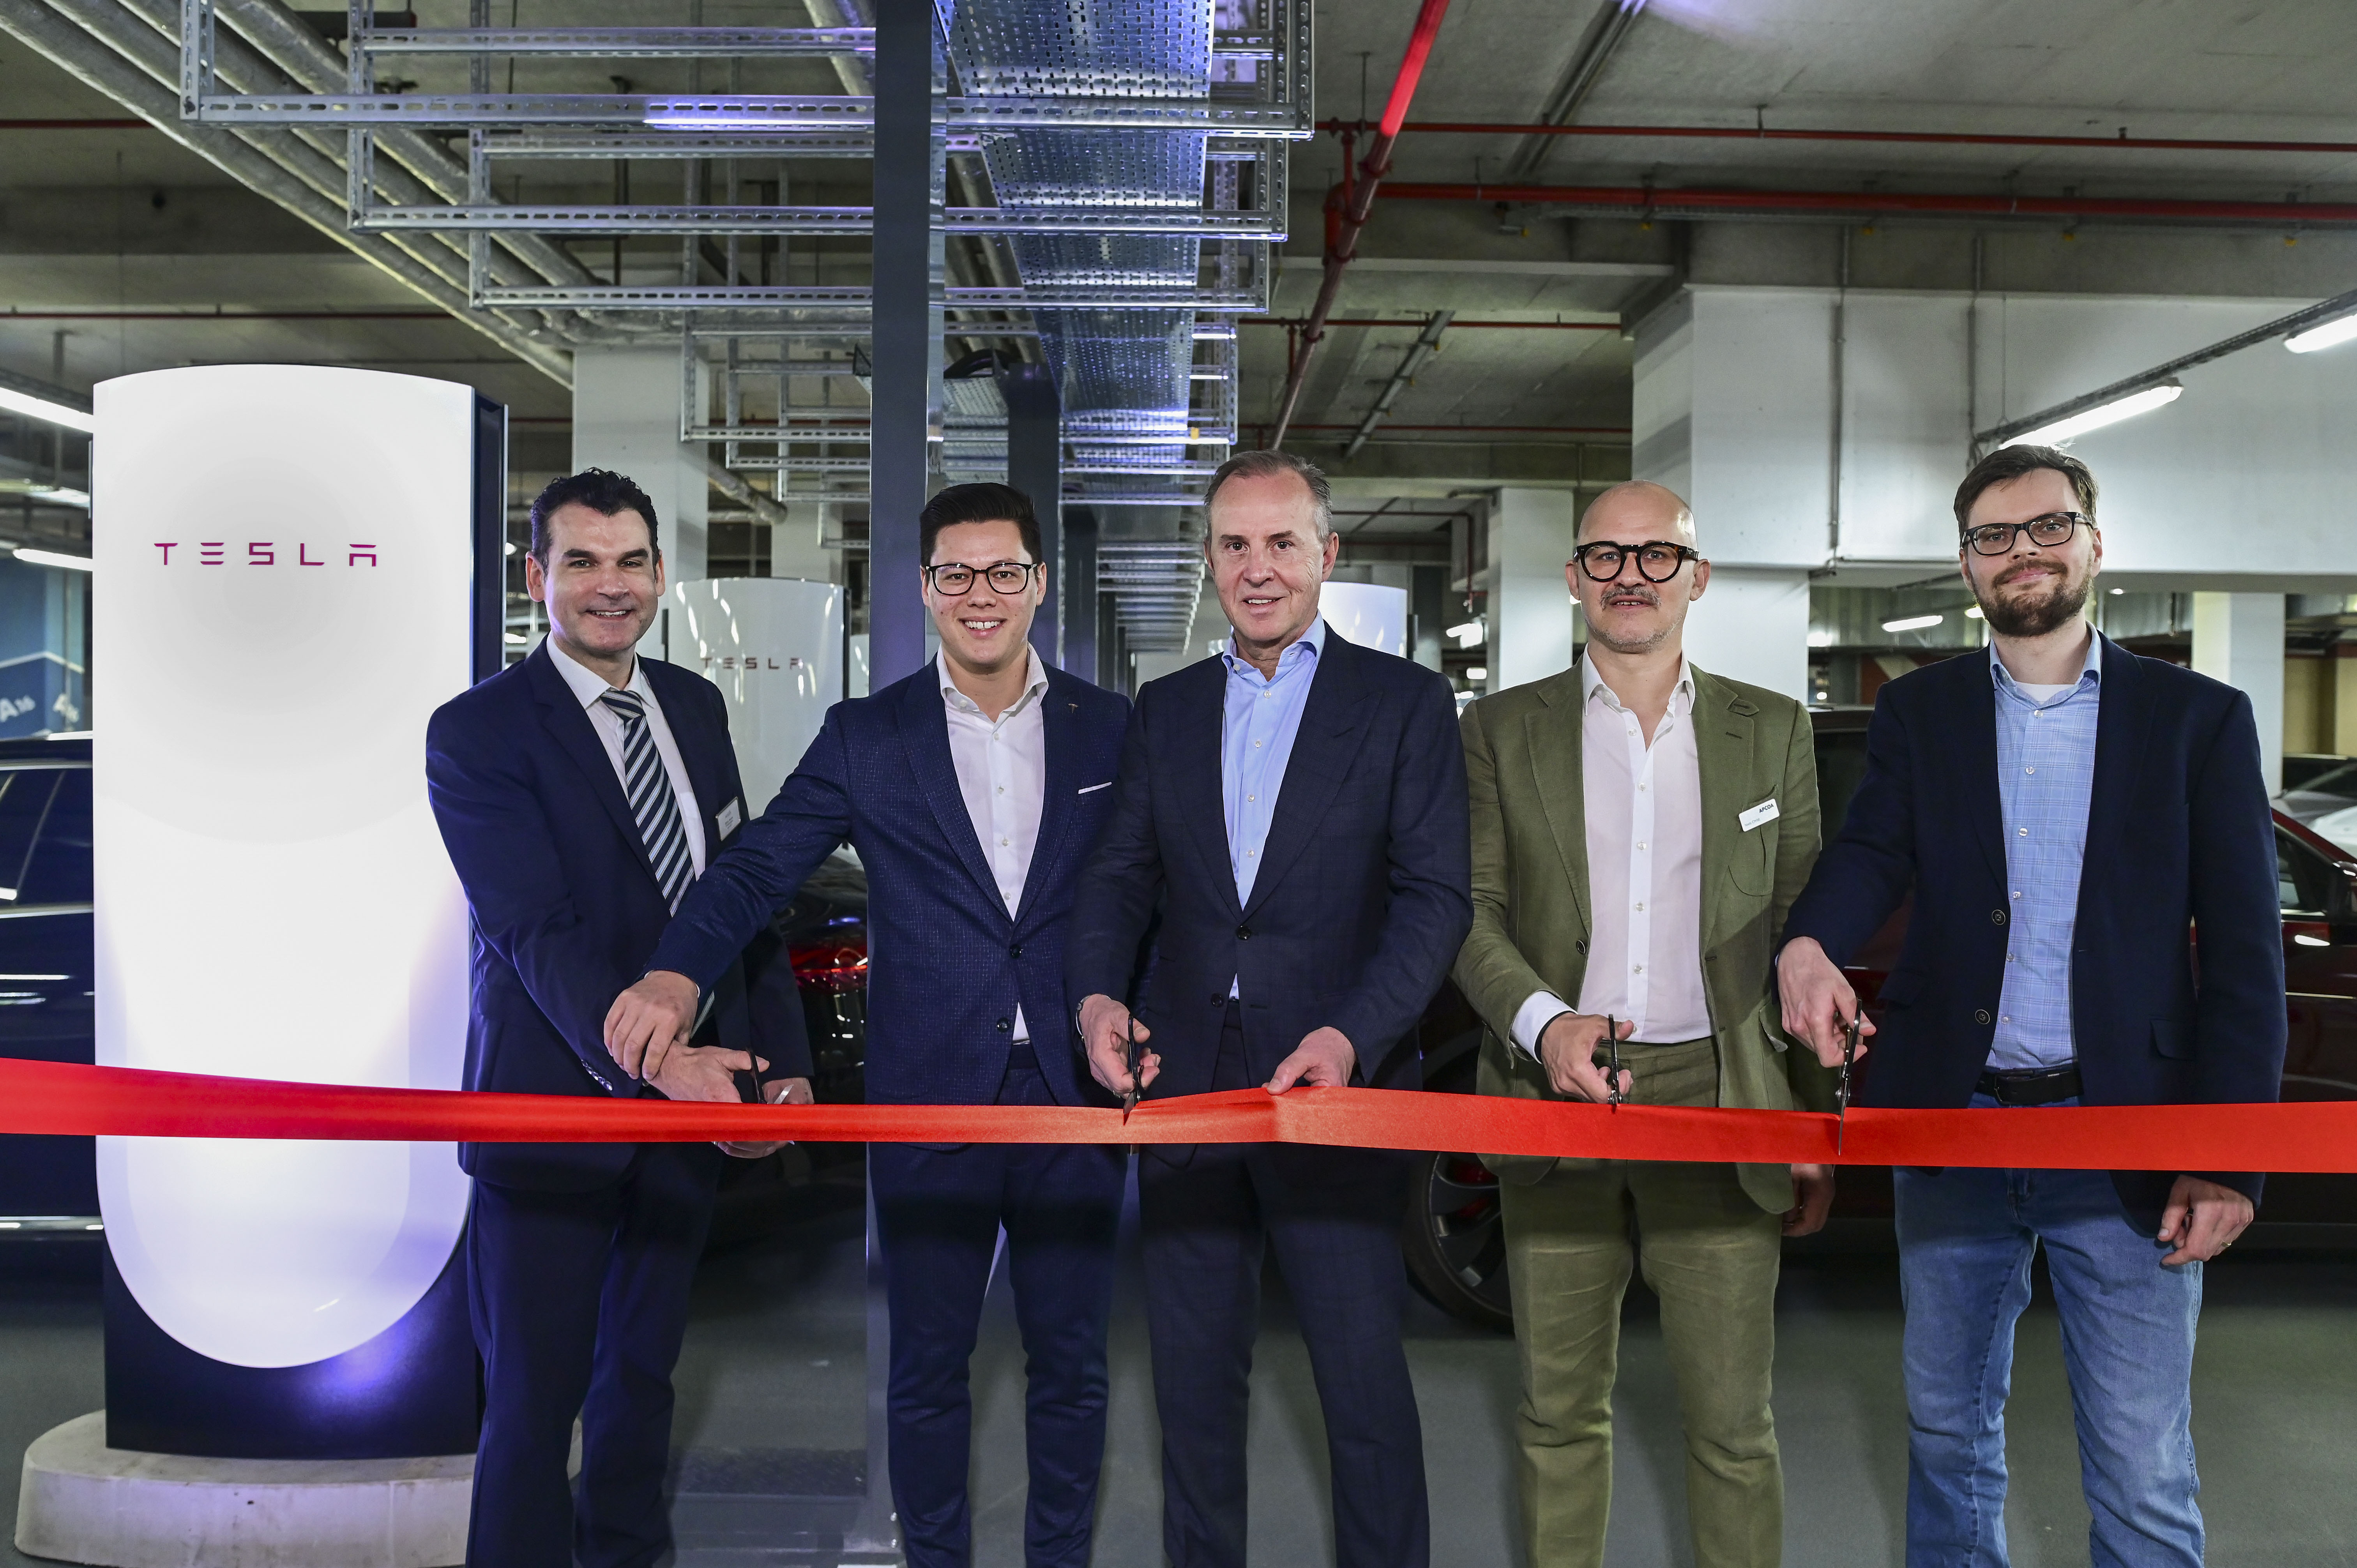 The largest Tesla fast-charging hub in Berlin city centre is being built in the APCOA multi-storey car park at the ALEXA shopping centre:  (from left to right) Oliver Hanna, Centre Manager ALEXA Shoppingcenter Berlin / Sierra Germany, Malte Kendel, Authorised Representative & Manager Charging / Tesla, Philippe Op de Beeck, Chief Executive Officer / APCOA, Niels Christ, Group Director Urban Hubs / APCOA and Martin Sölle, Senior Project Manager Innovation / Berlin Agency for Electromobility eMO